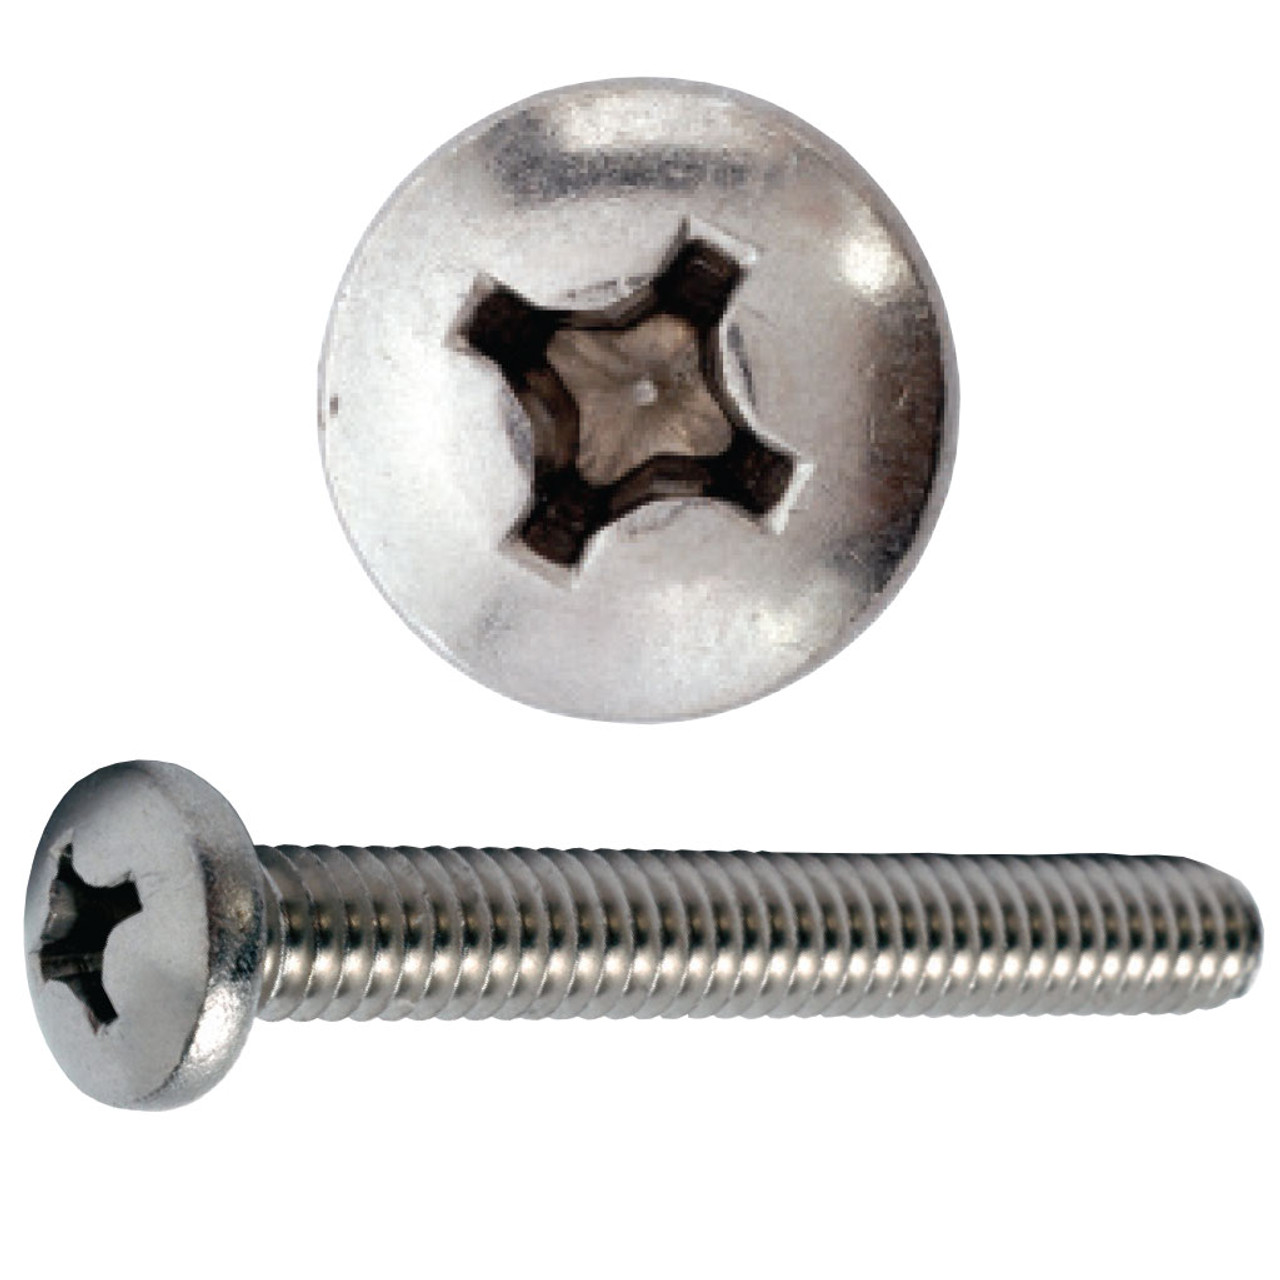 10-32 x 1/2" Slotted Pan Head Machine Screws Stainless Steel 18-8 Qty 2500 